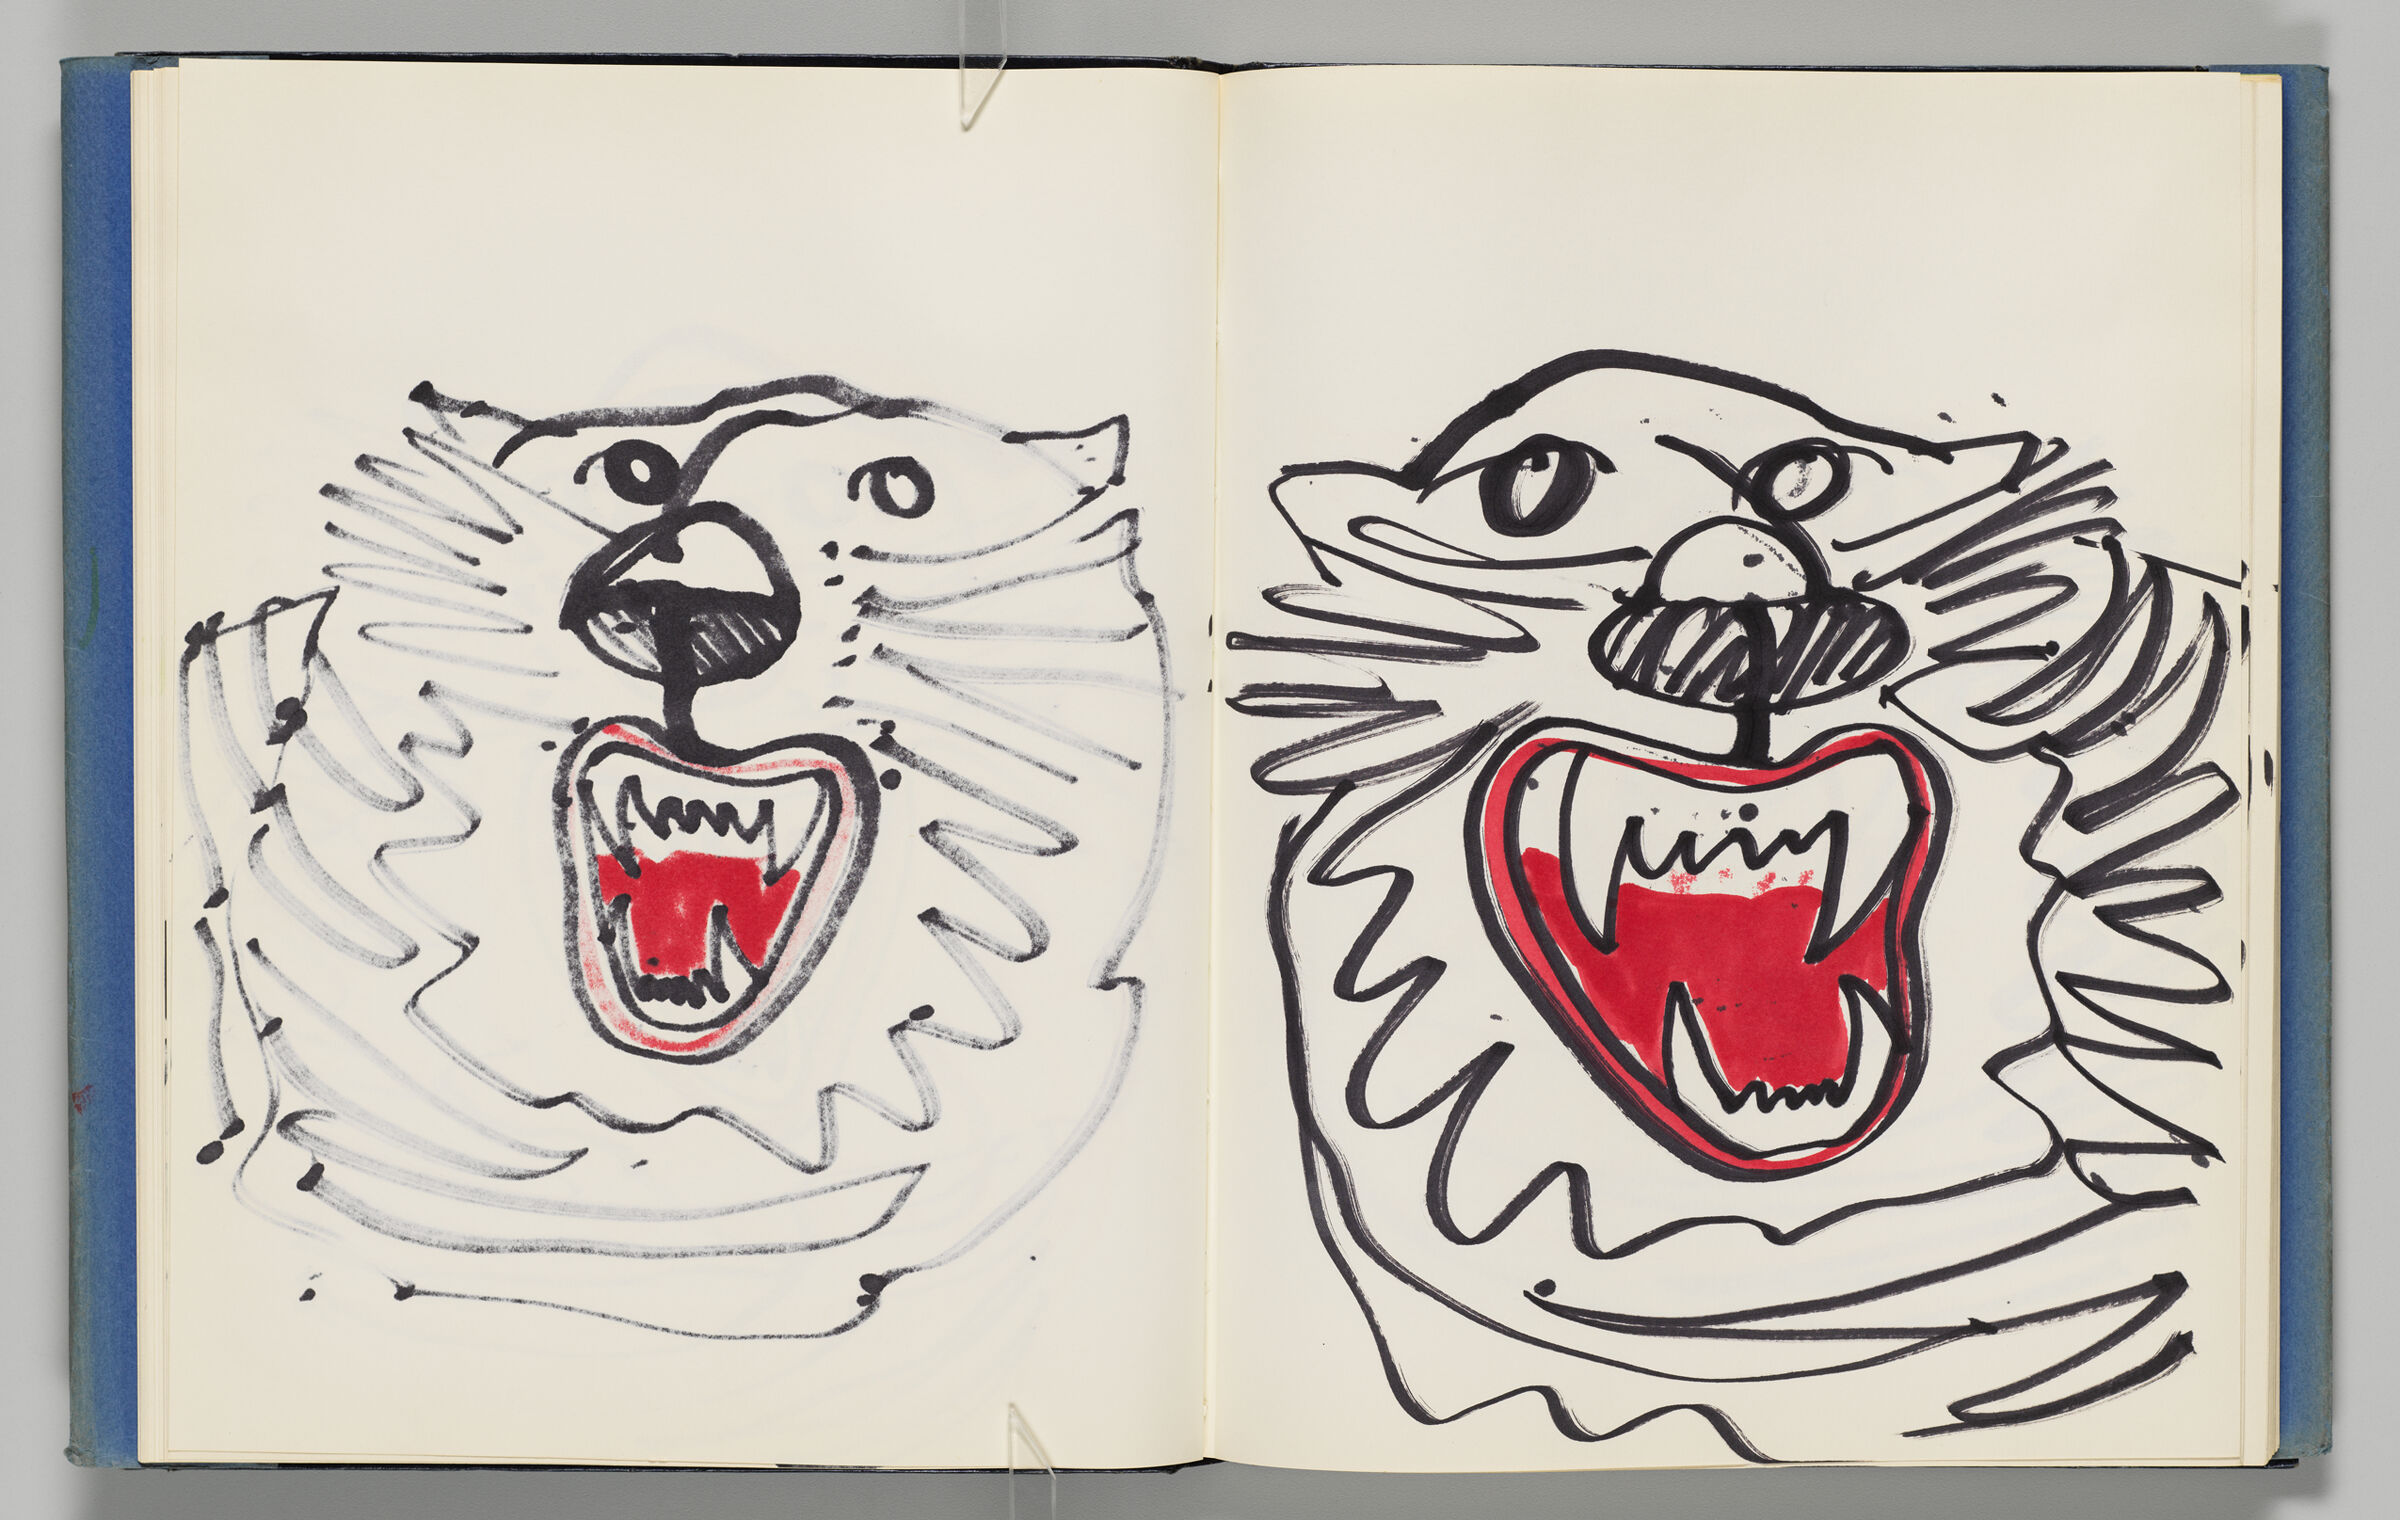 Untitled (Bleed-Through Of Previous Page, Left Page); Untitled (Tiger, Right Page)